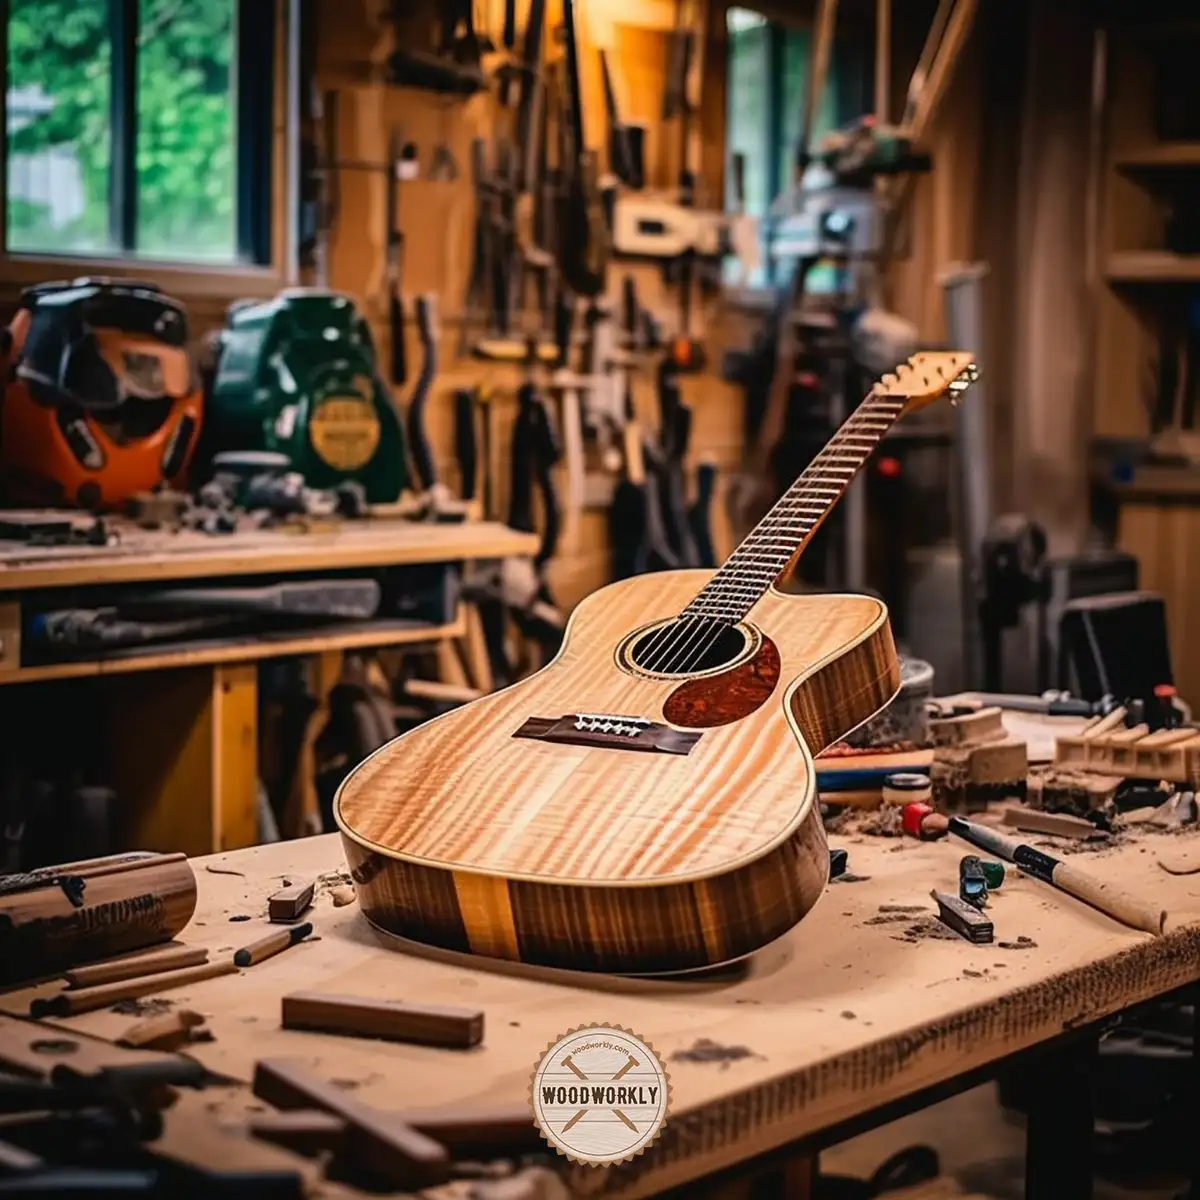 Guitar made by bending wood